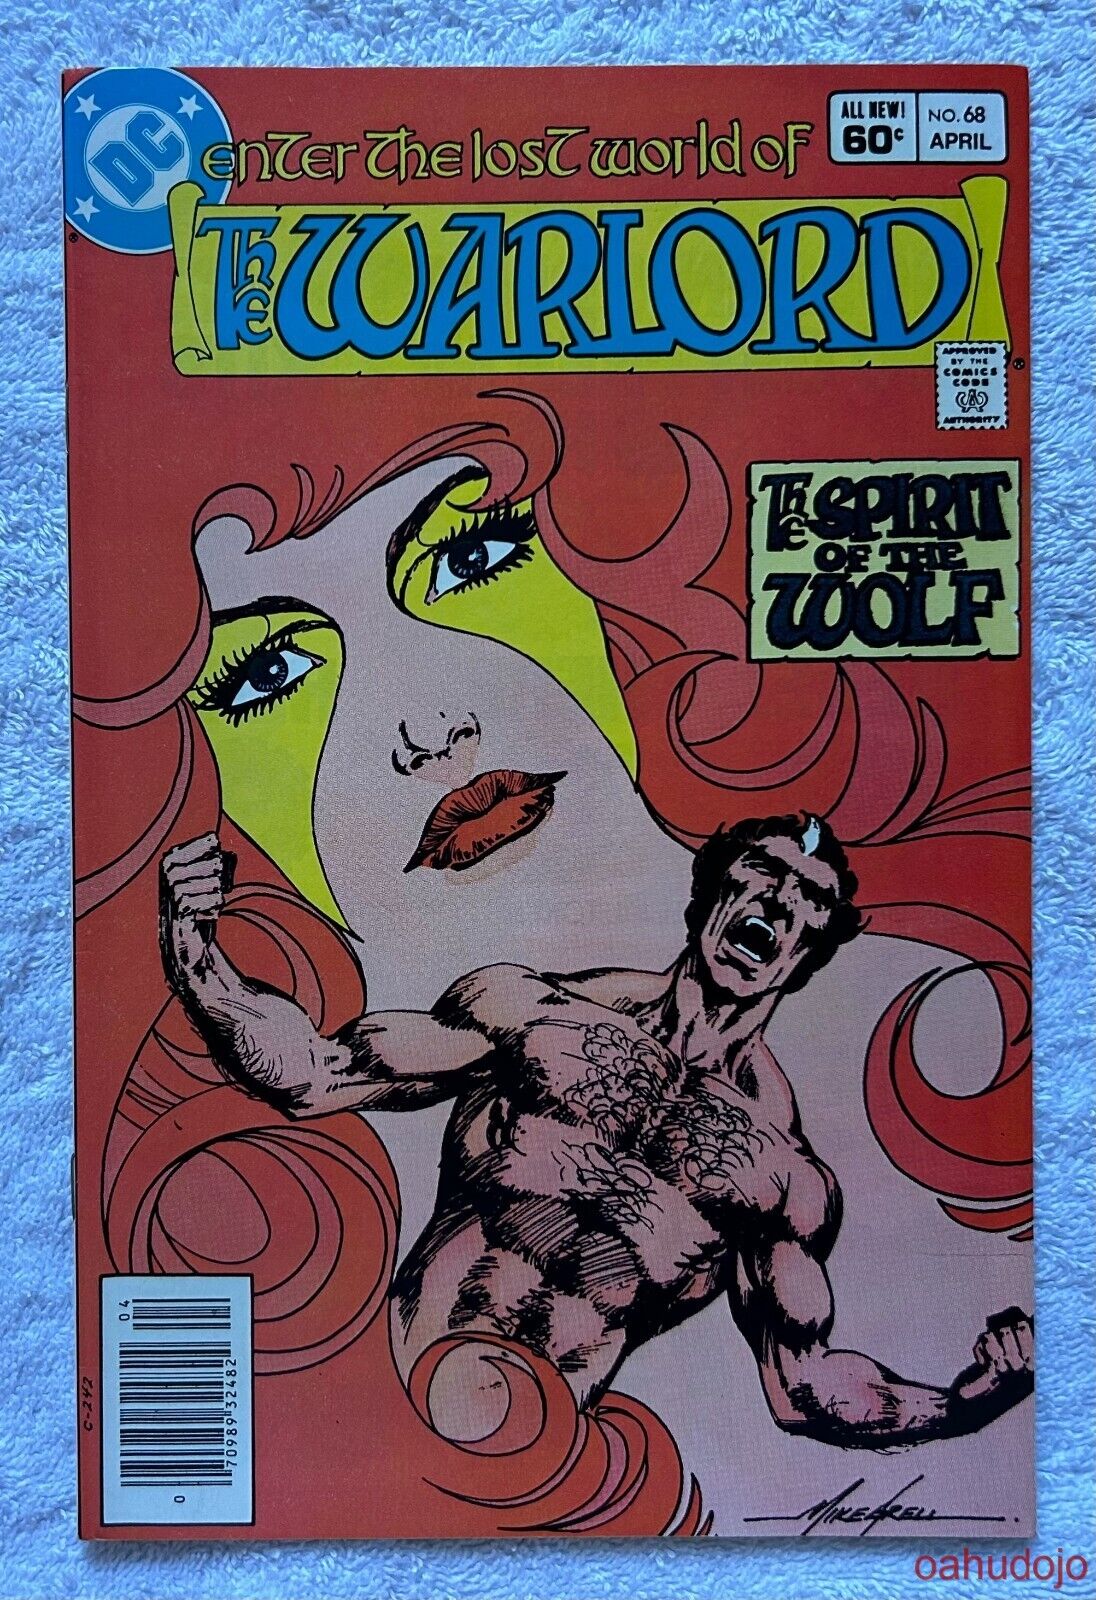 DC WARLORD #68 1st Series Mark Jewelers Variant April 1983 VF*